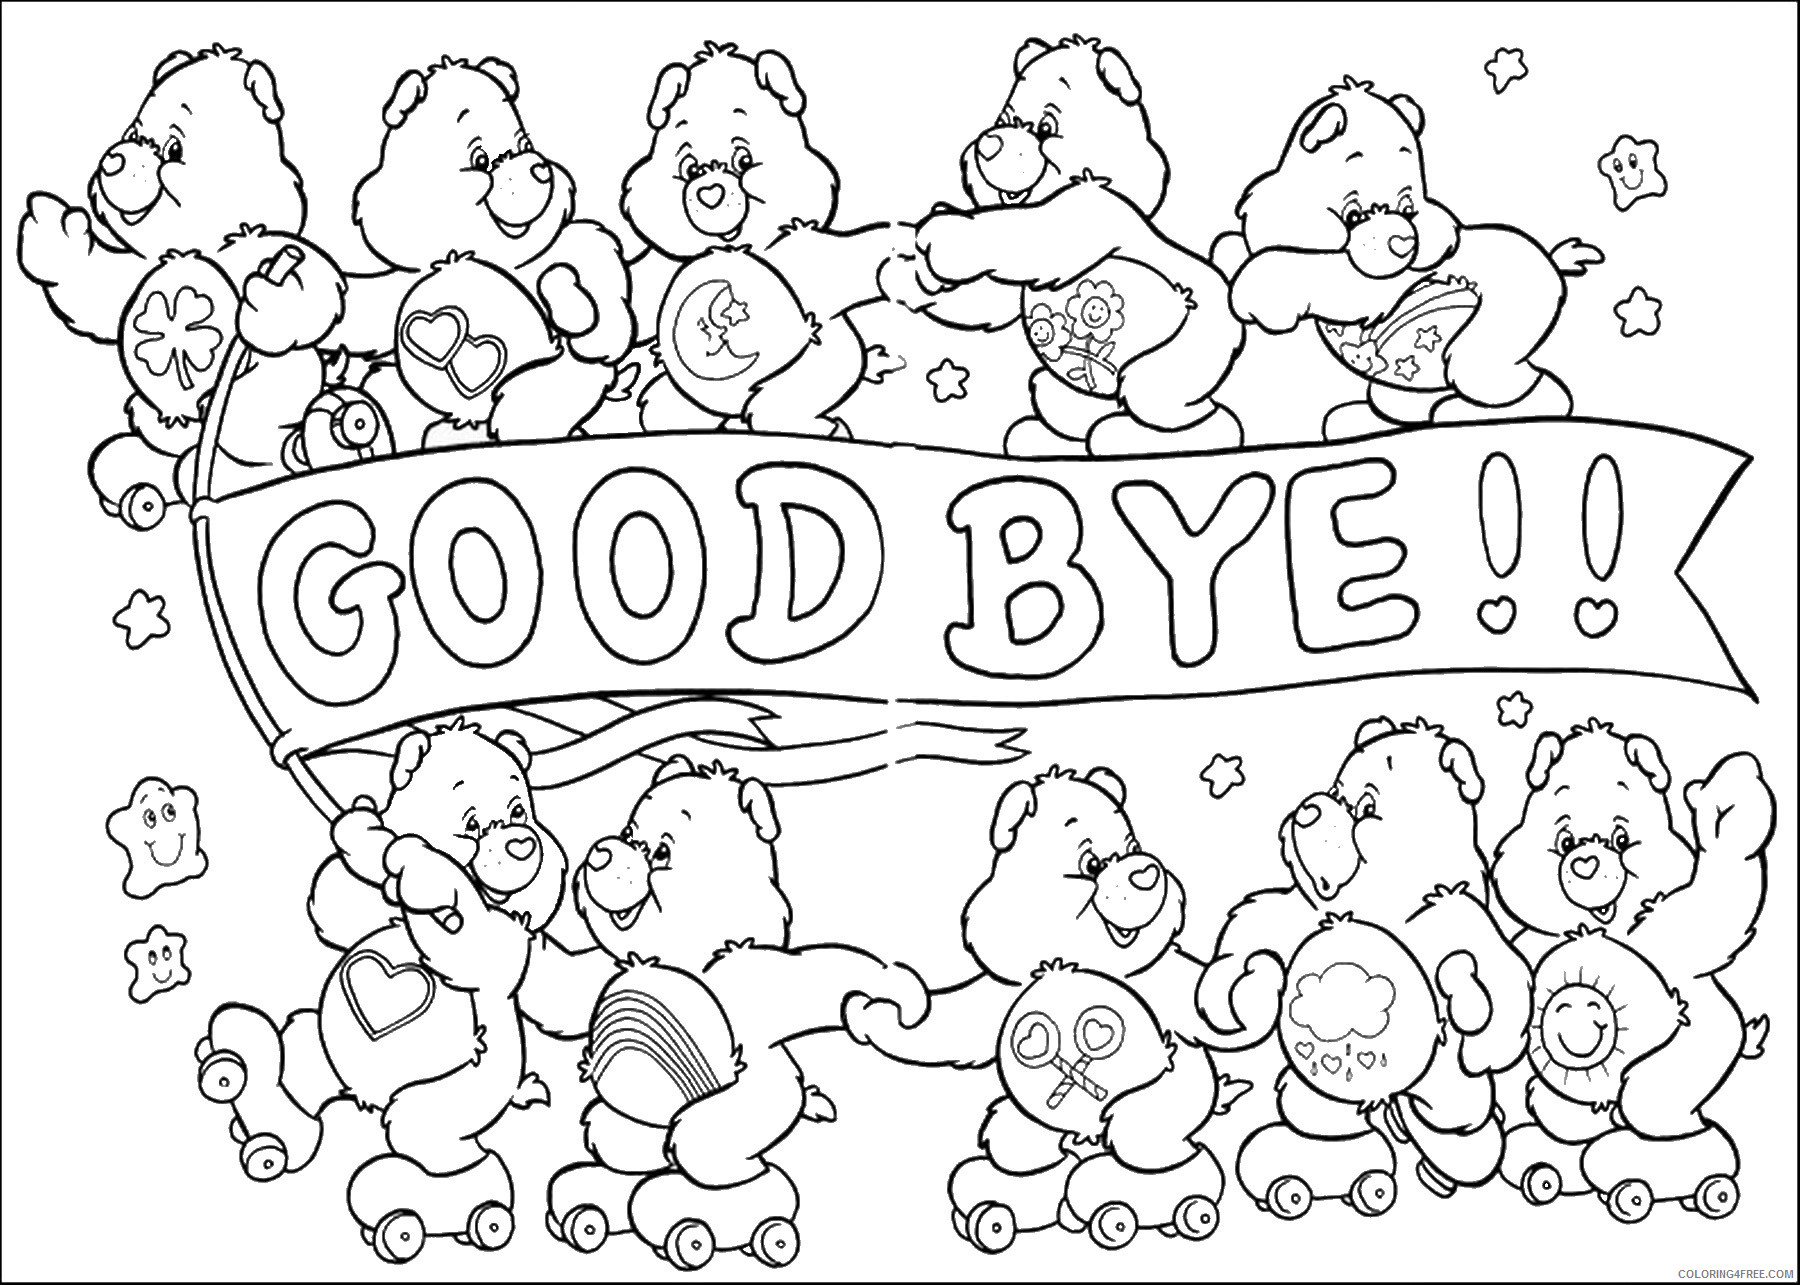 Care Bears Coloring Pages Cartoons care_bears_cl_25 Printable 2020 1561 Coloring4free